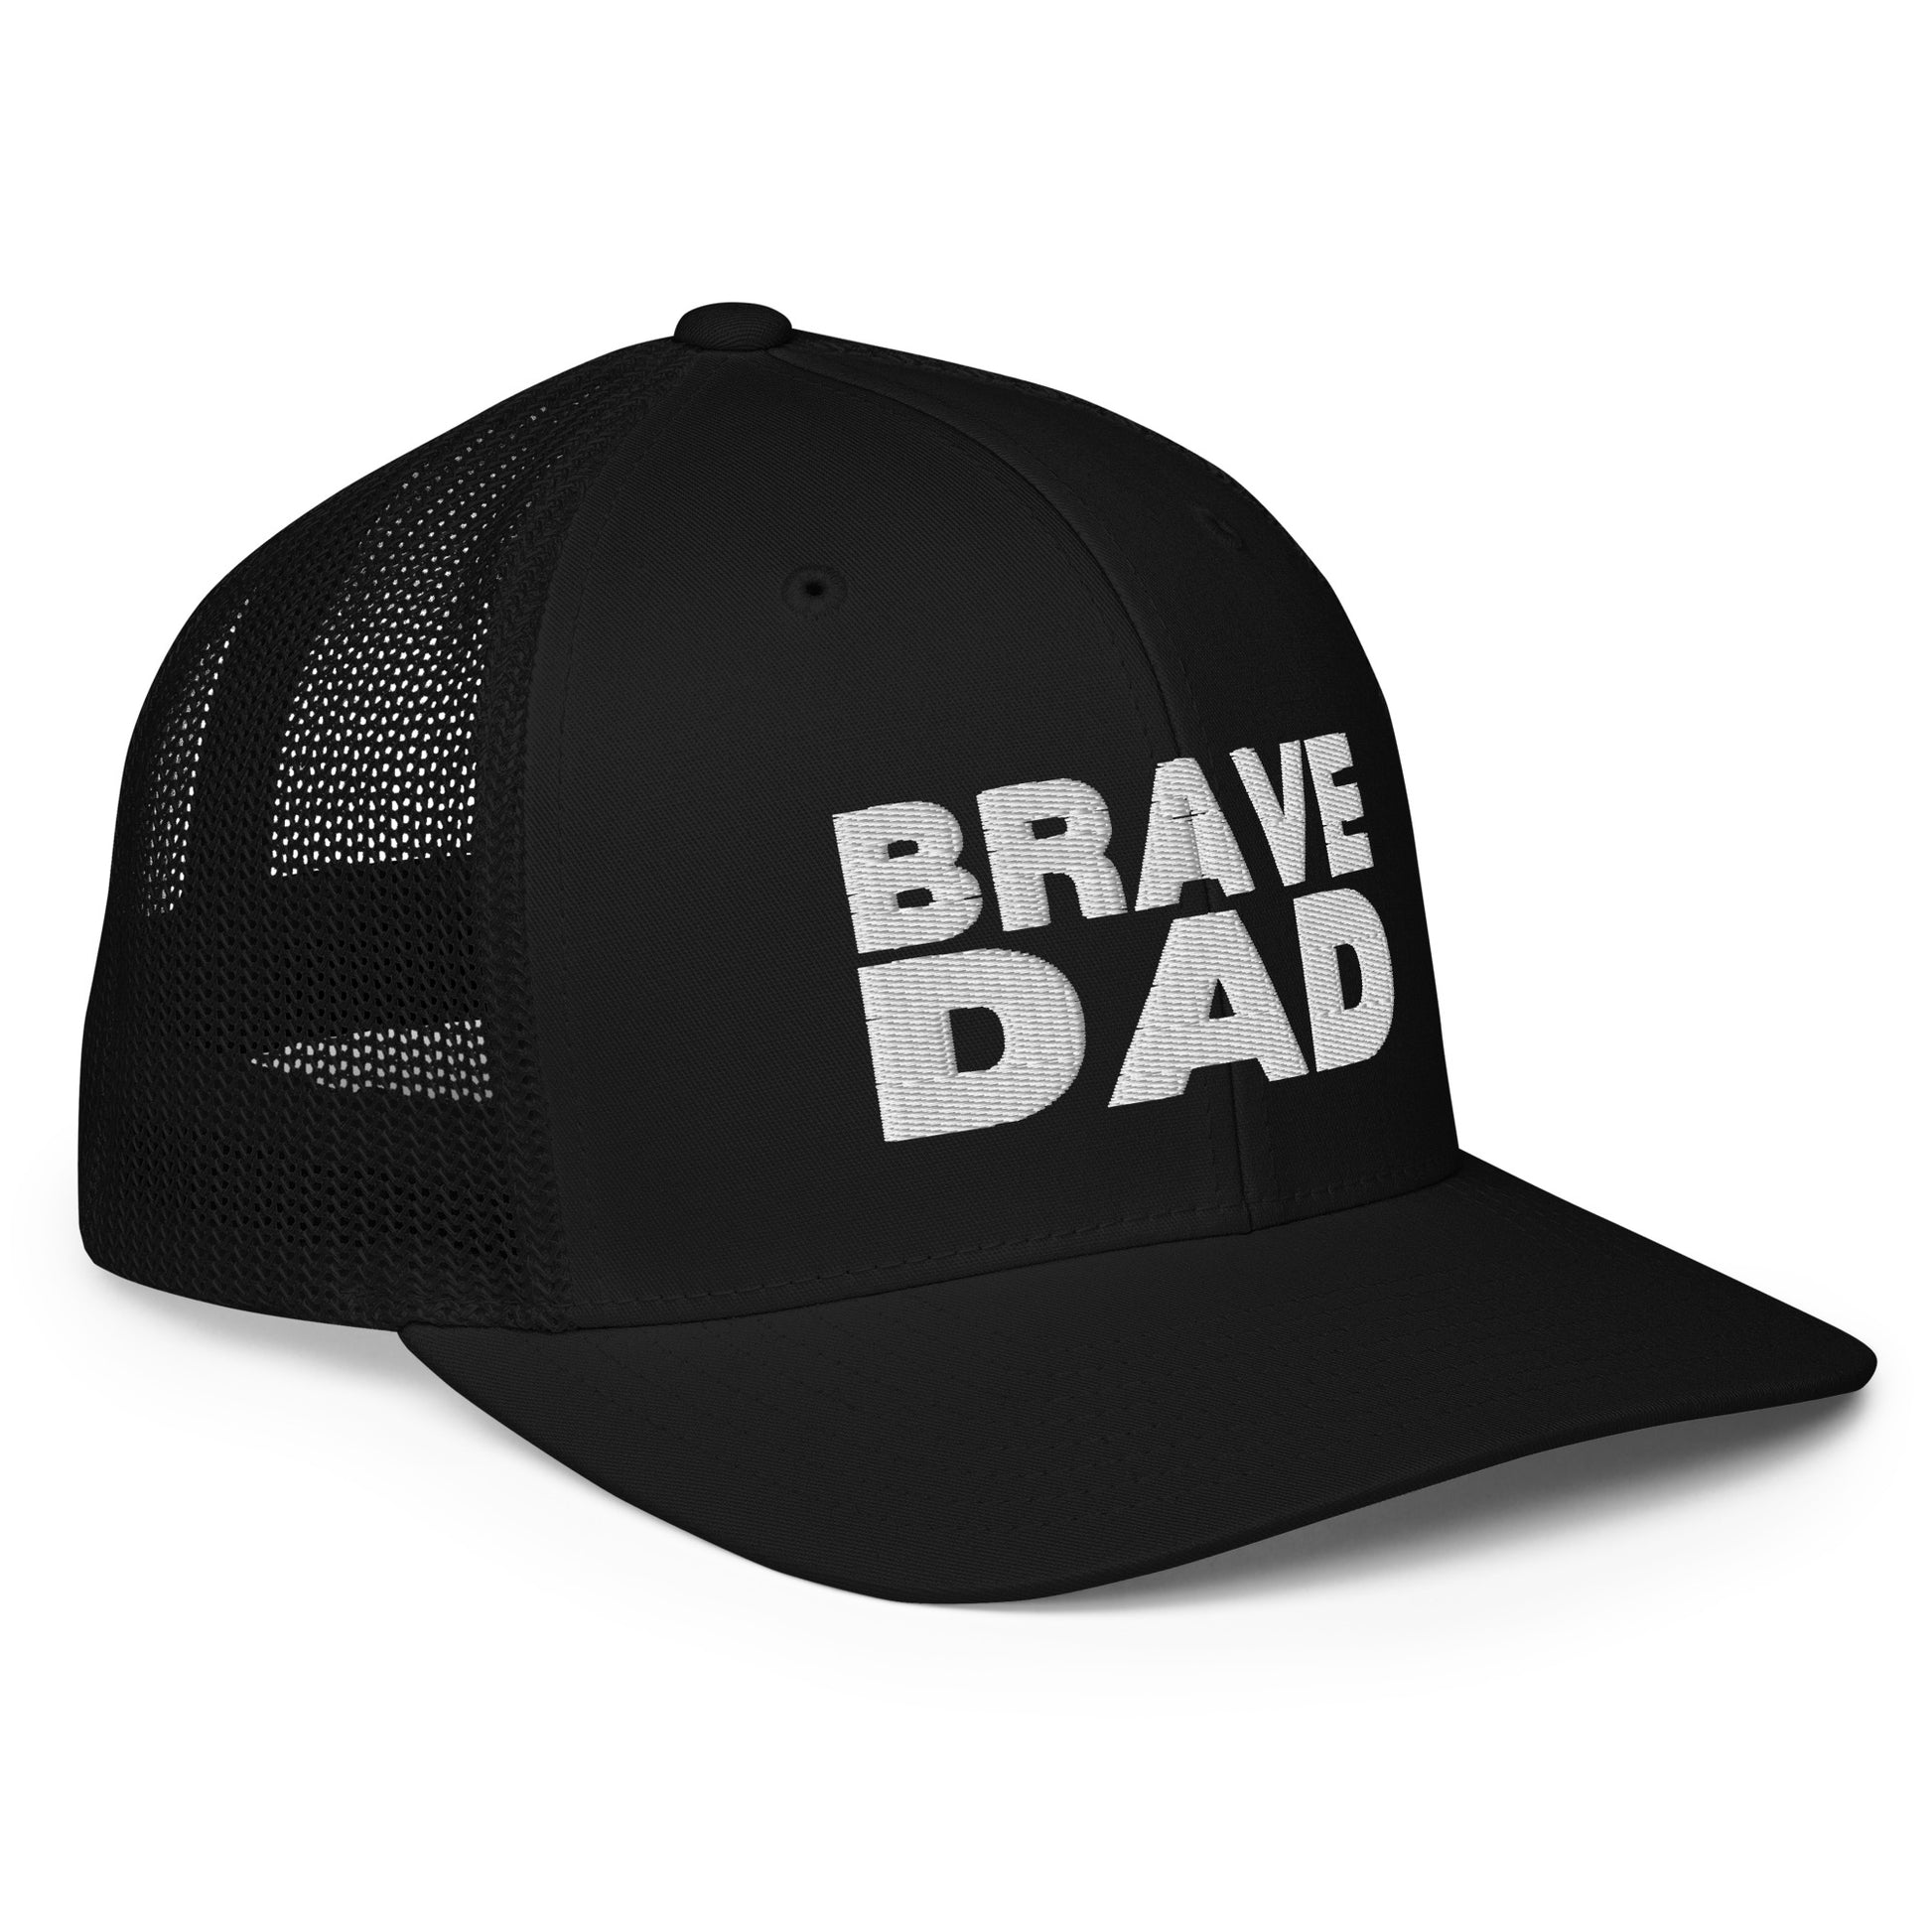 Brave Dad Hat - Friends of the Faith